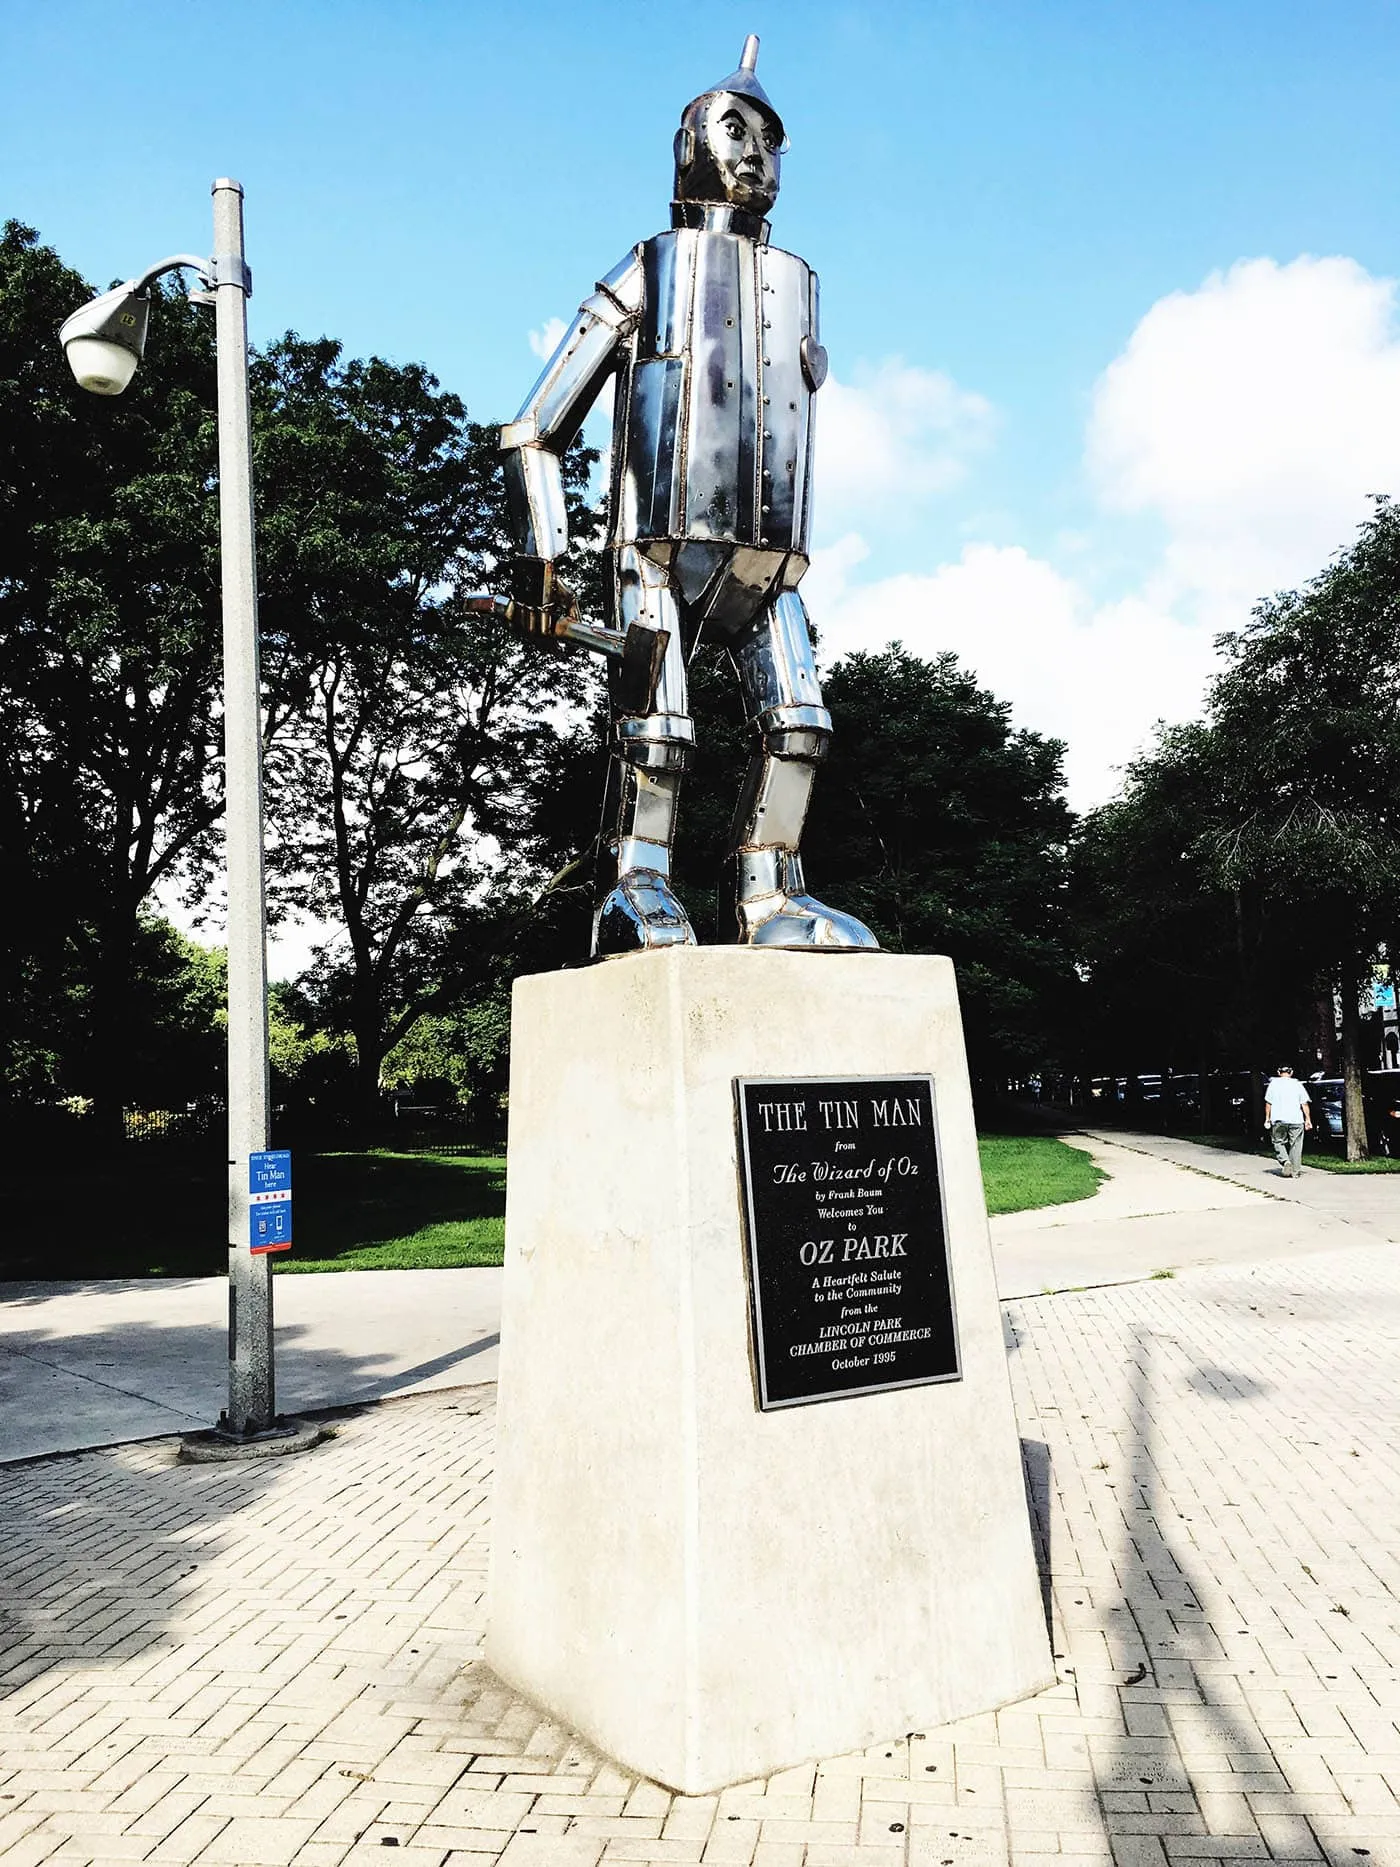 The Tin Man statue at Oz Park in Chicago, Illinois - a Wizard of Oz themed Park.